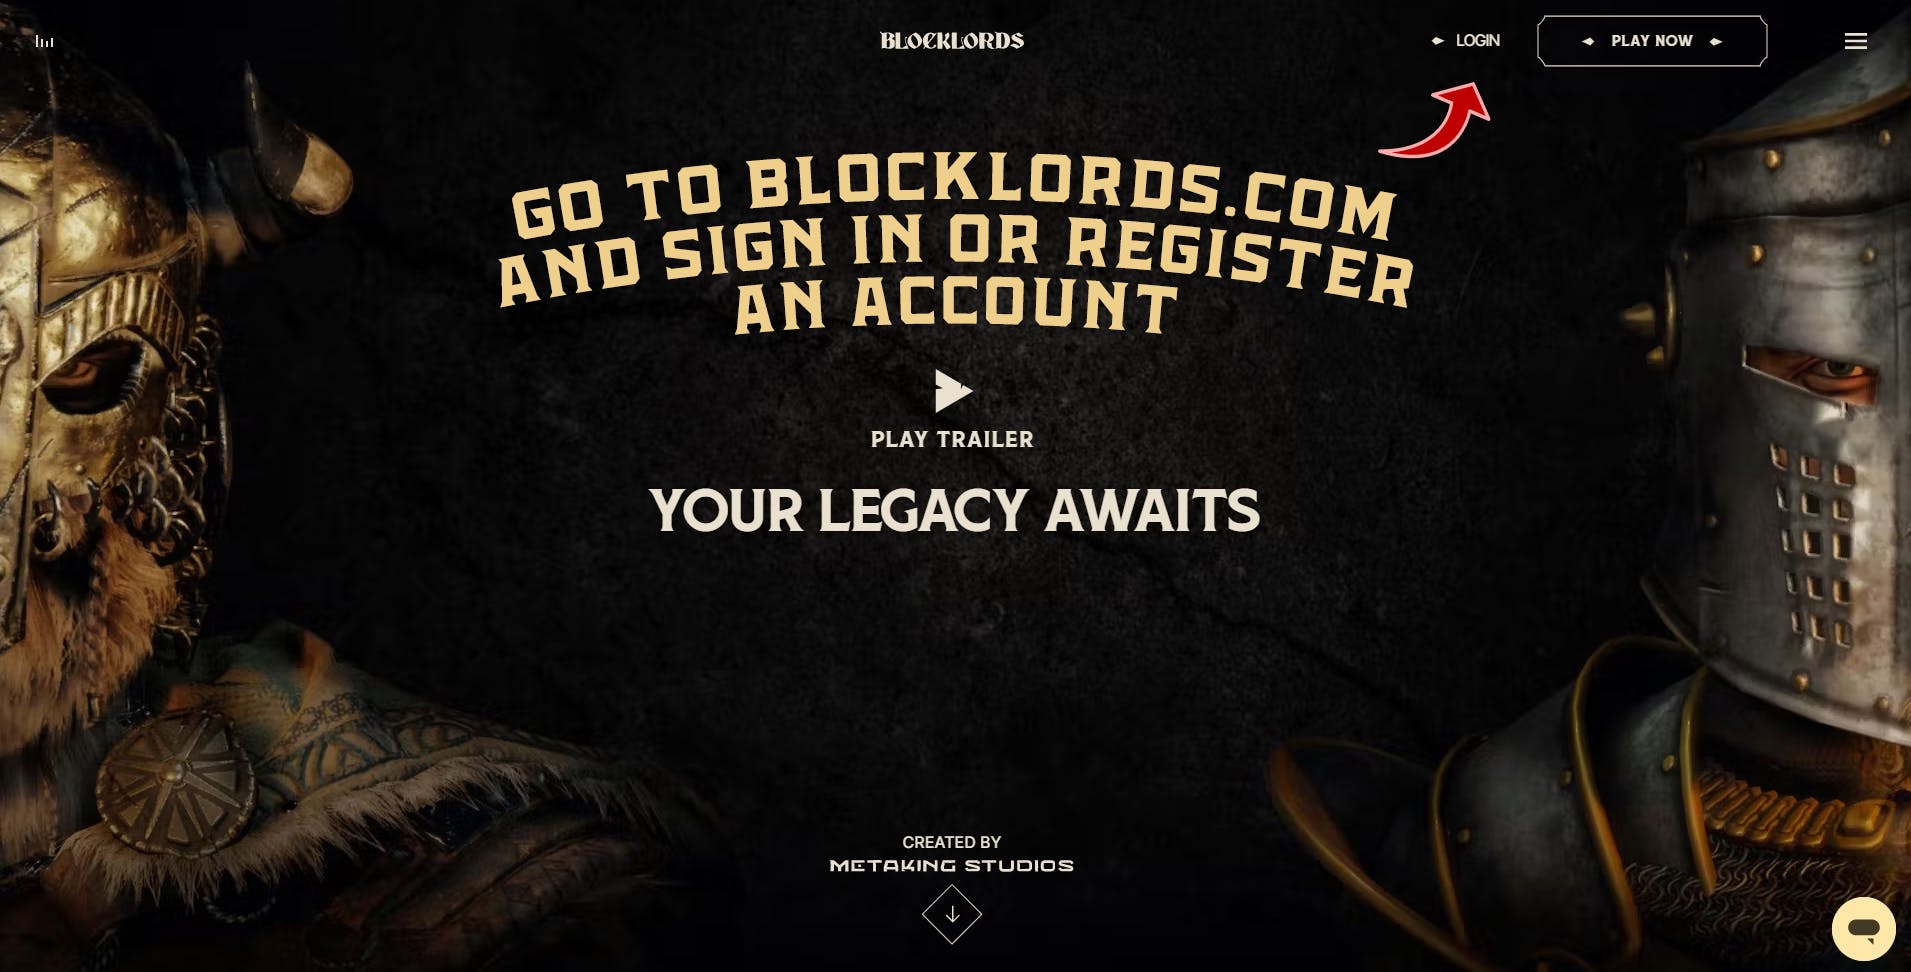 Sign into BLOCKLORDS